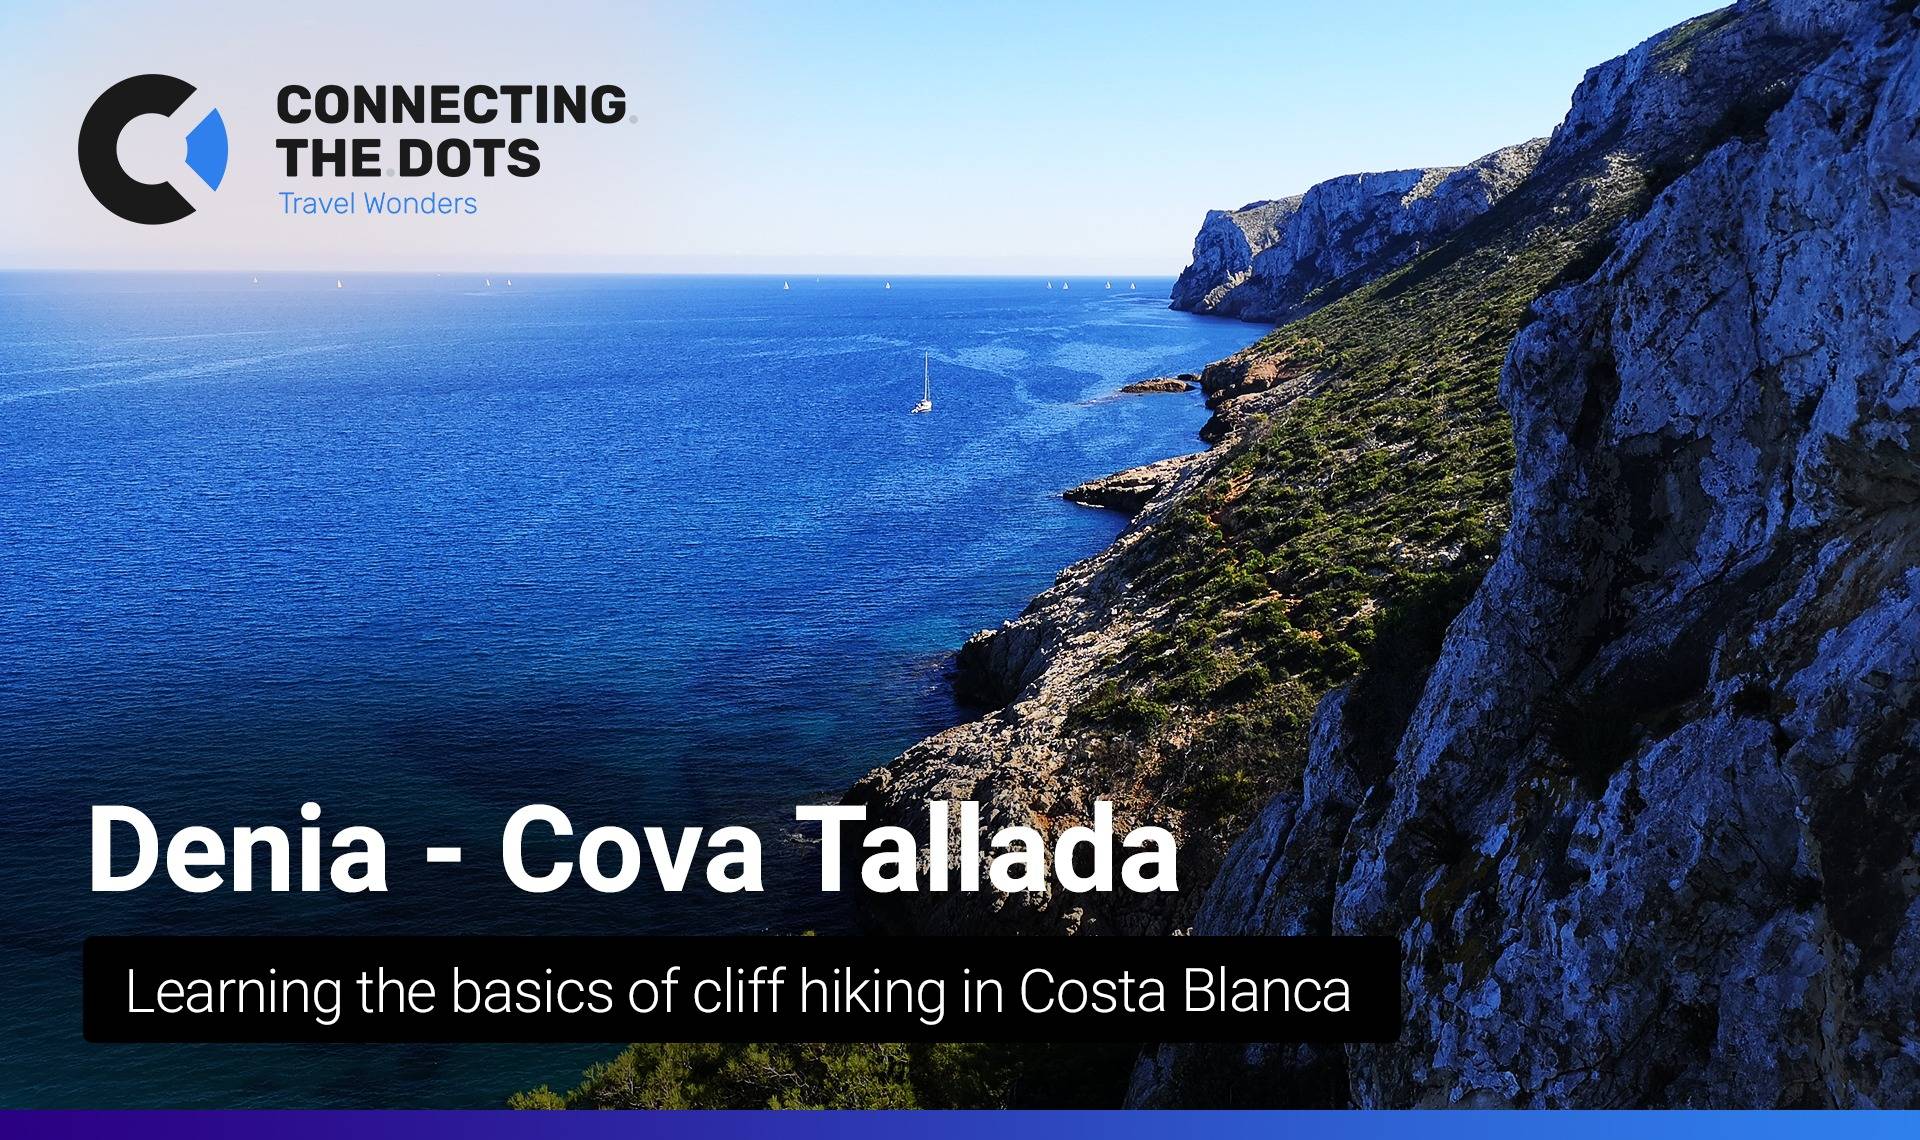 Learning the basics of cliff hiking in Costa Blanca of Spain.